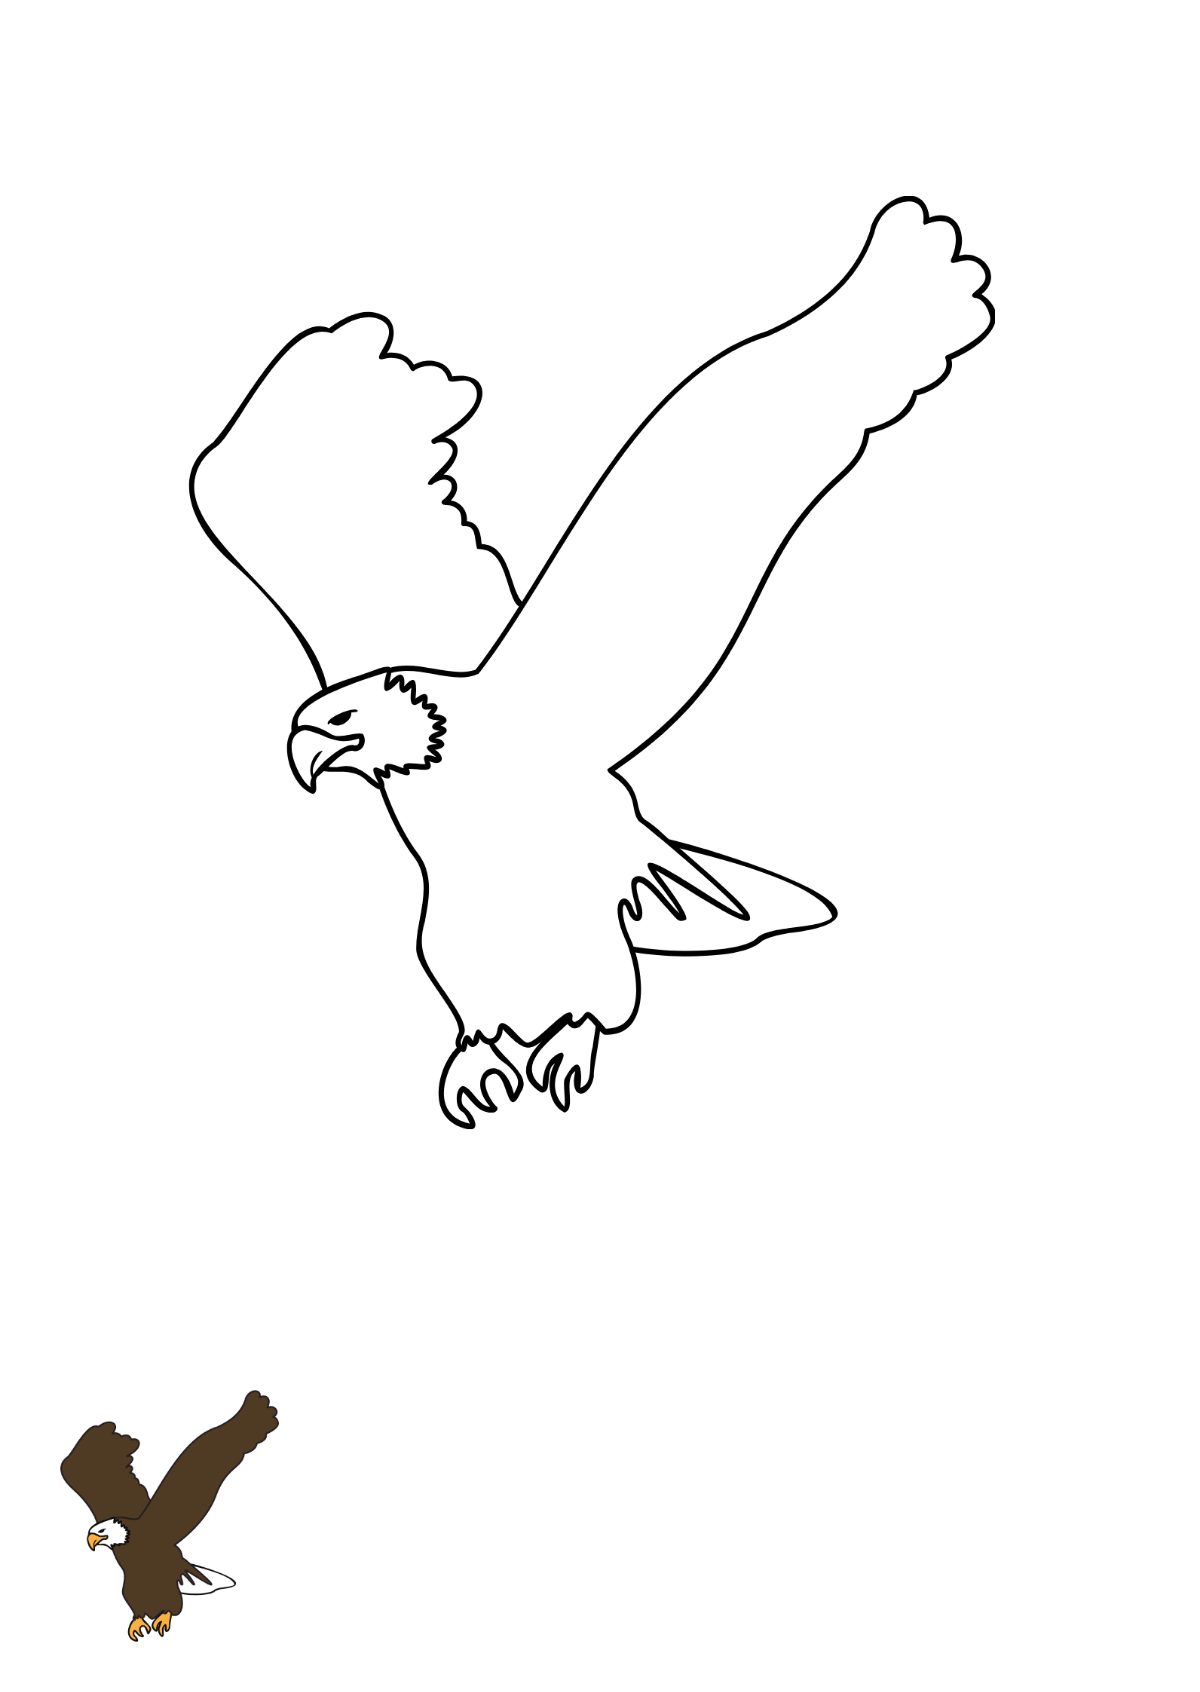 Winged Eagle coloring page